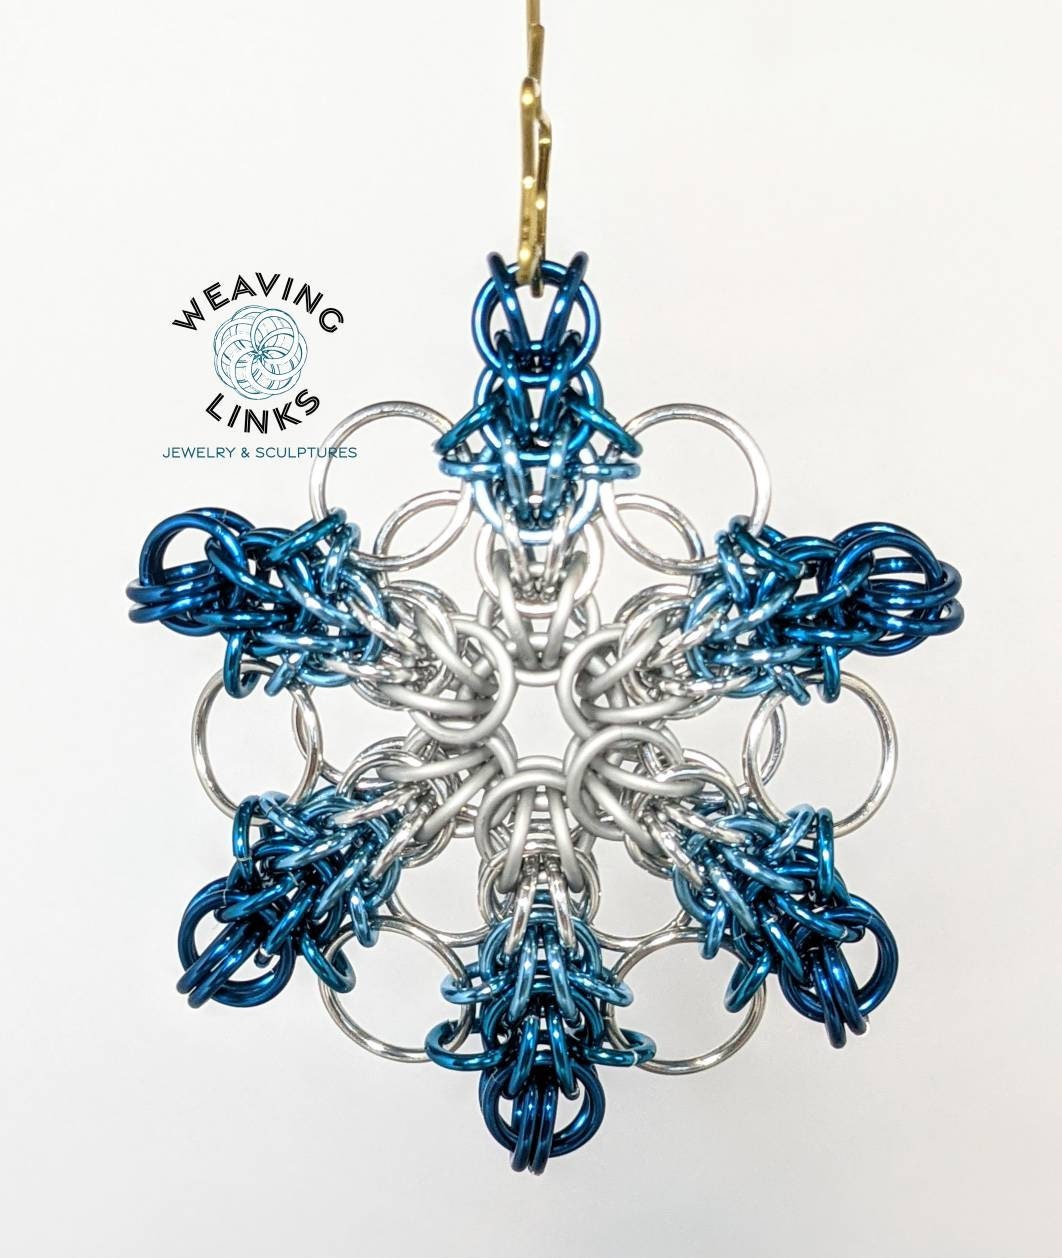 Instructions for Ombre Steampunk Snowflake Ornament